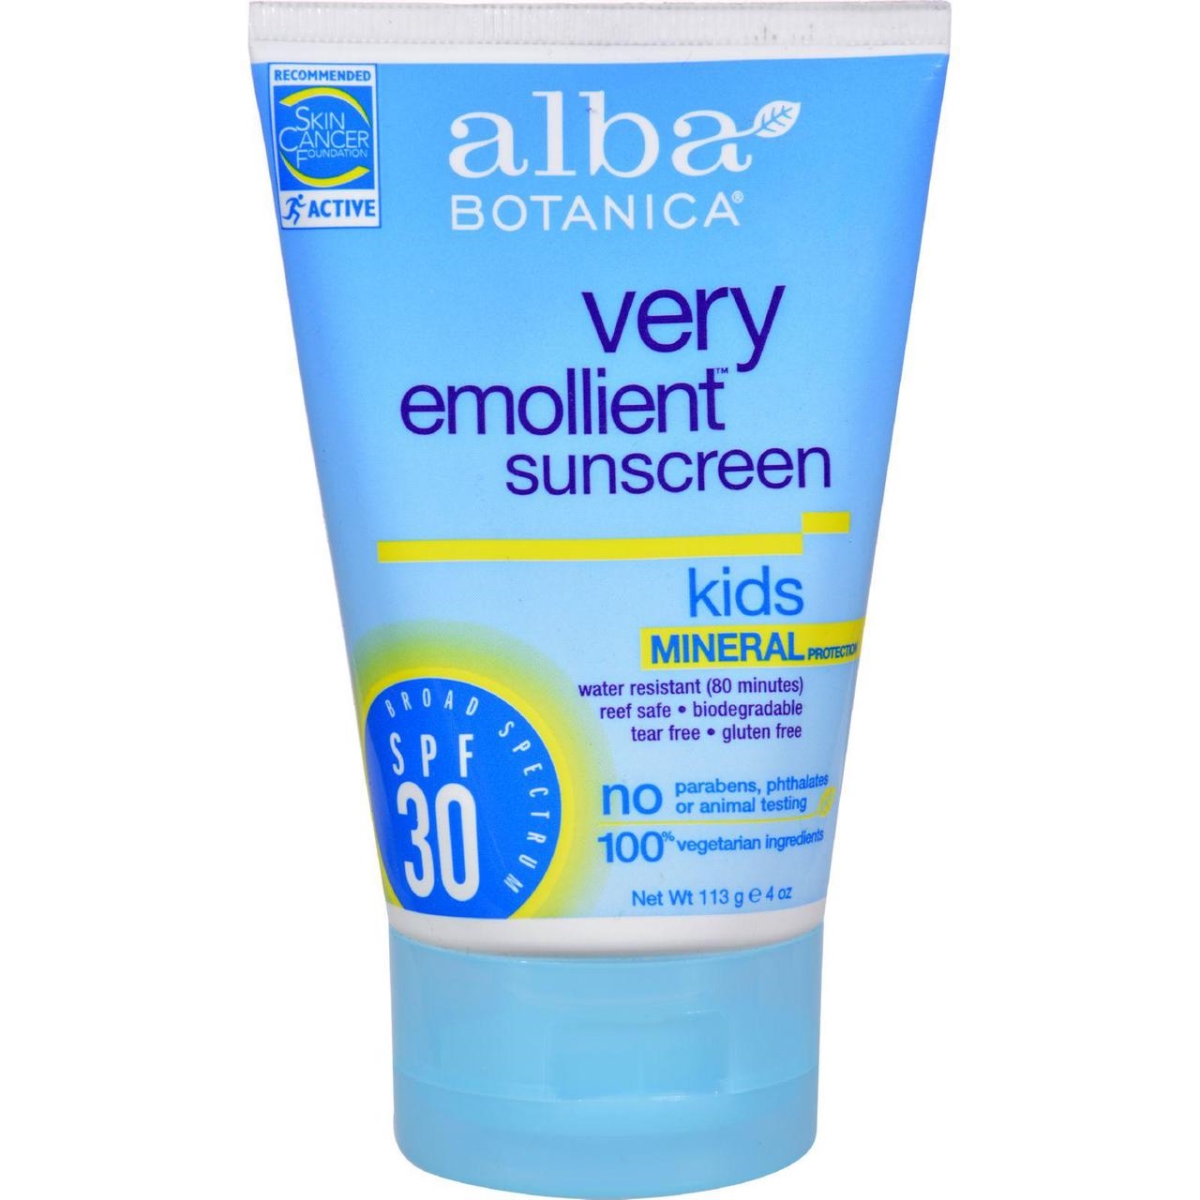 Hg0401521 4 Oz Very Emollient Natural Sun Block Mineral Protection Kids Spf 30